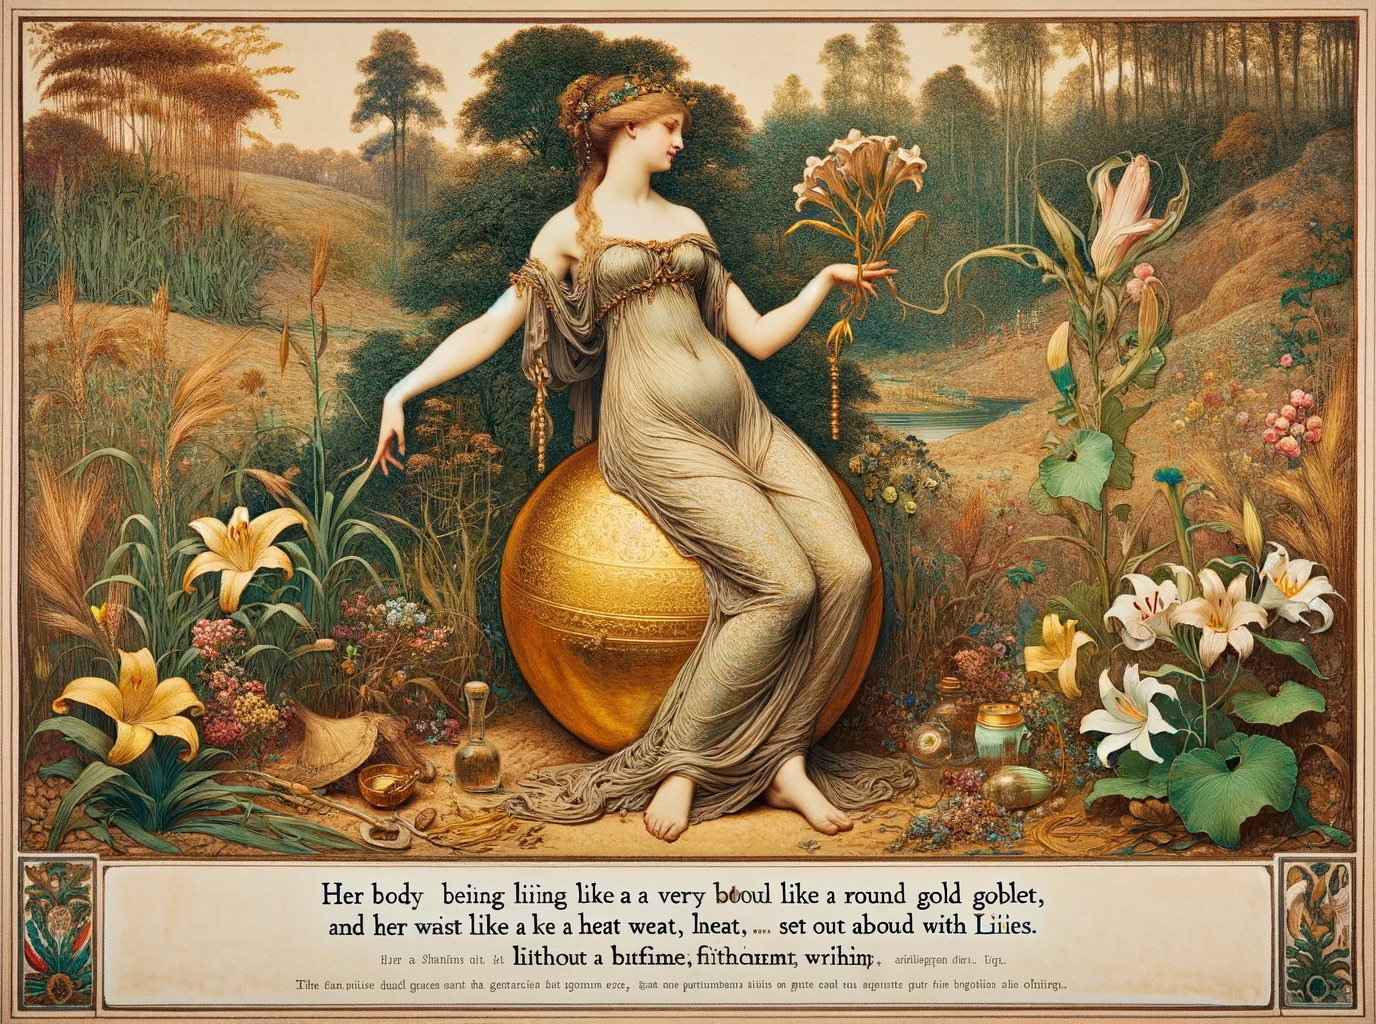 Ark.au Illustrated Bible - Song of Solomon 7:2 - Thy navel is like a round goblet, which wanteth not liquor: thy belly is like an heap of wheat set about with lilies.